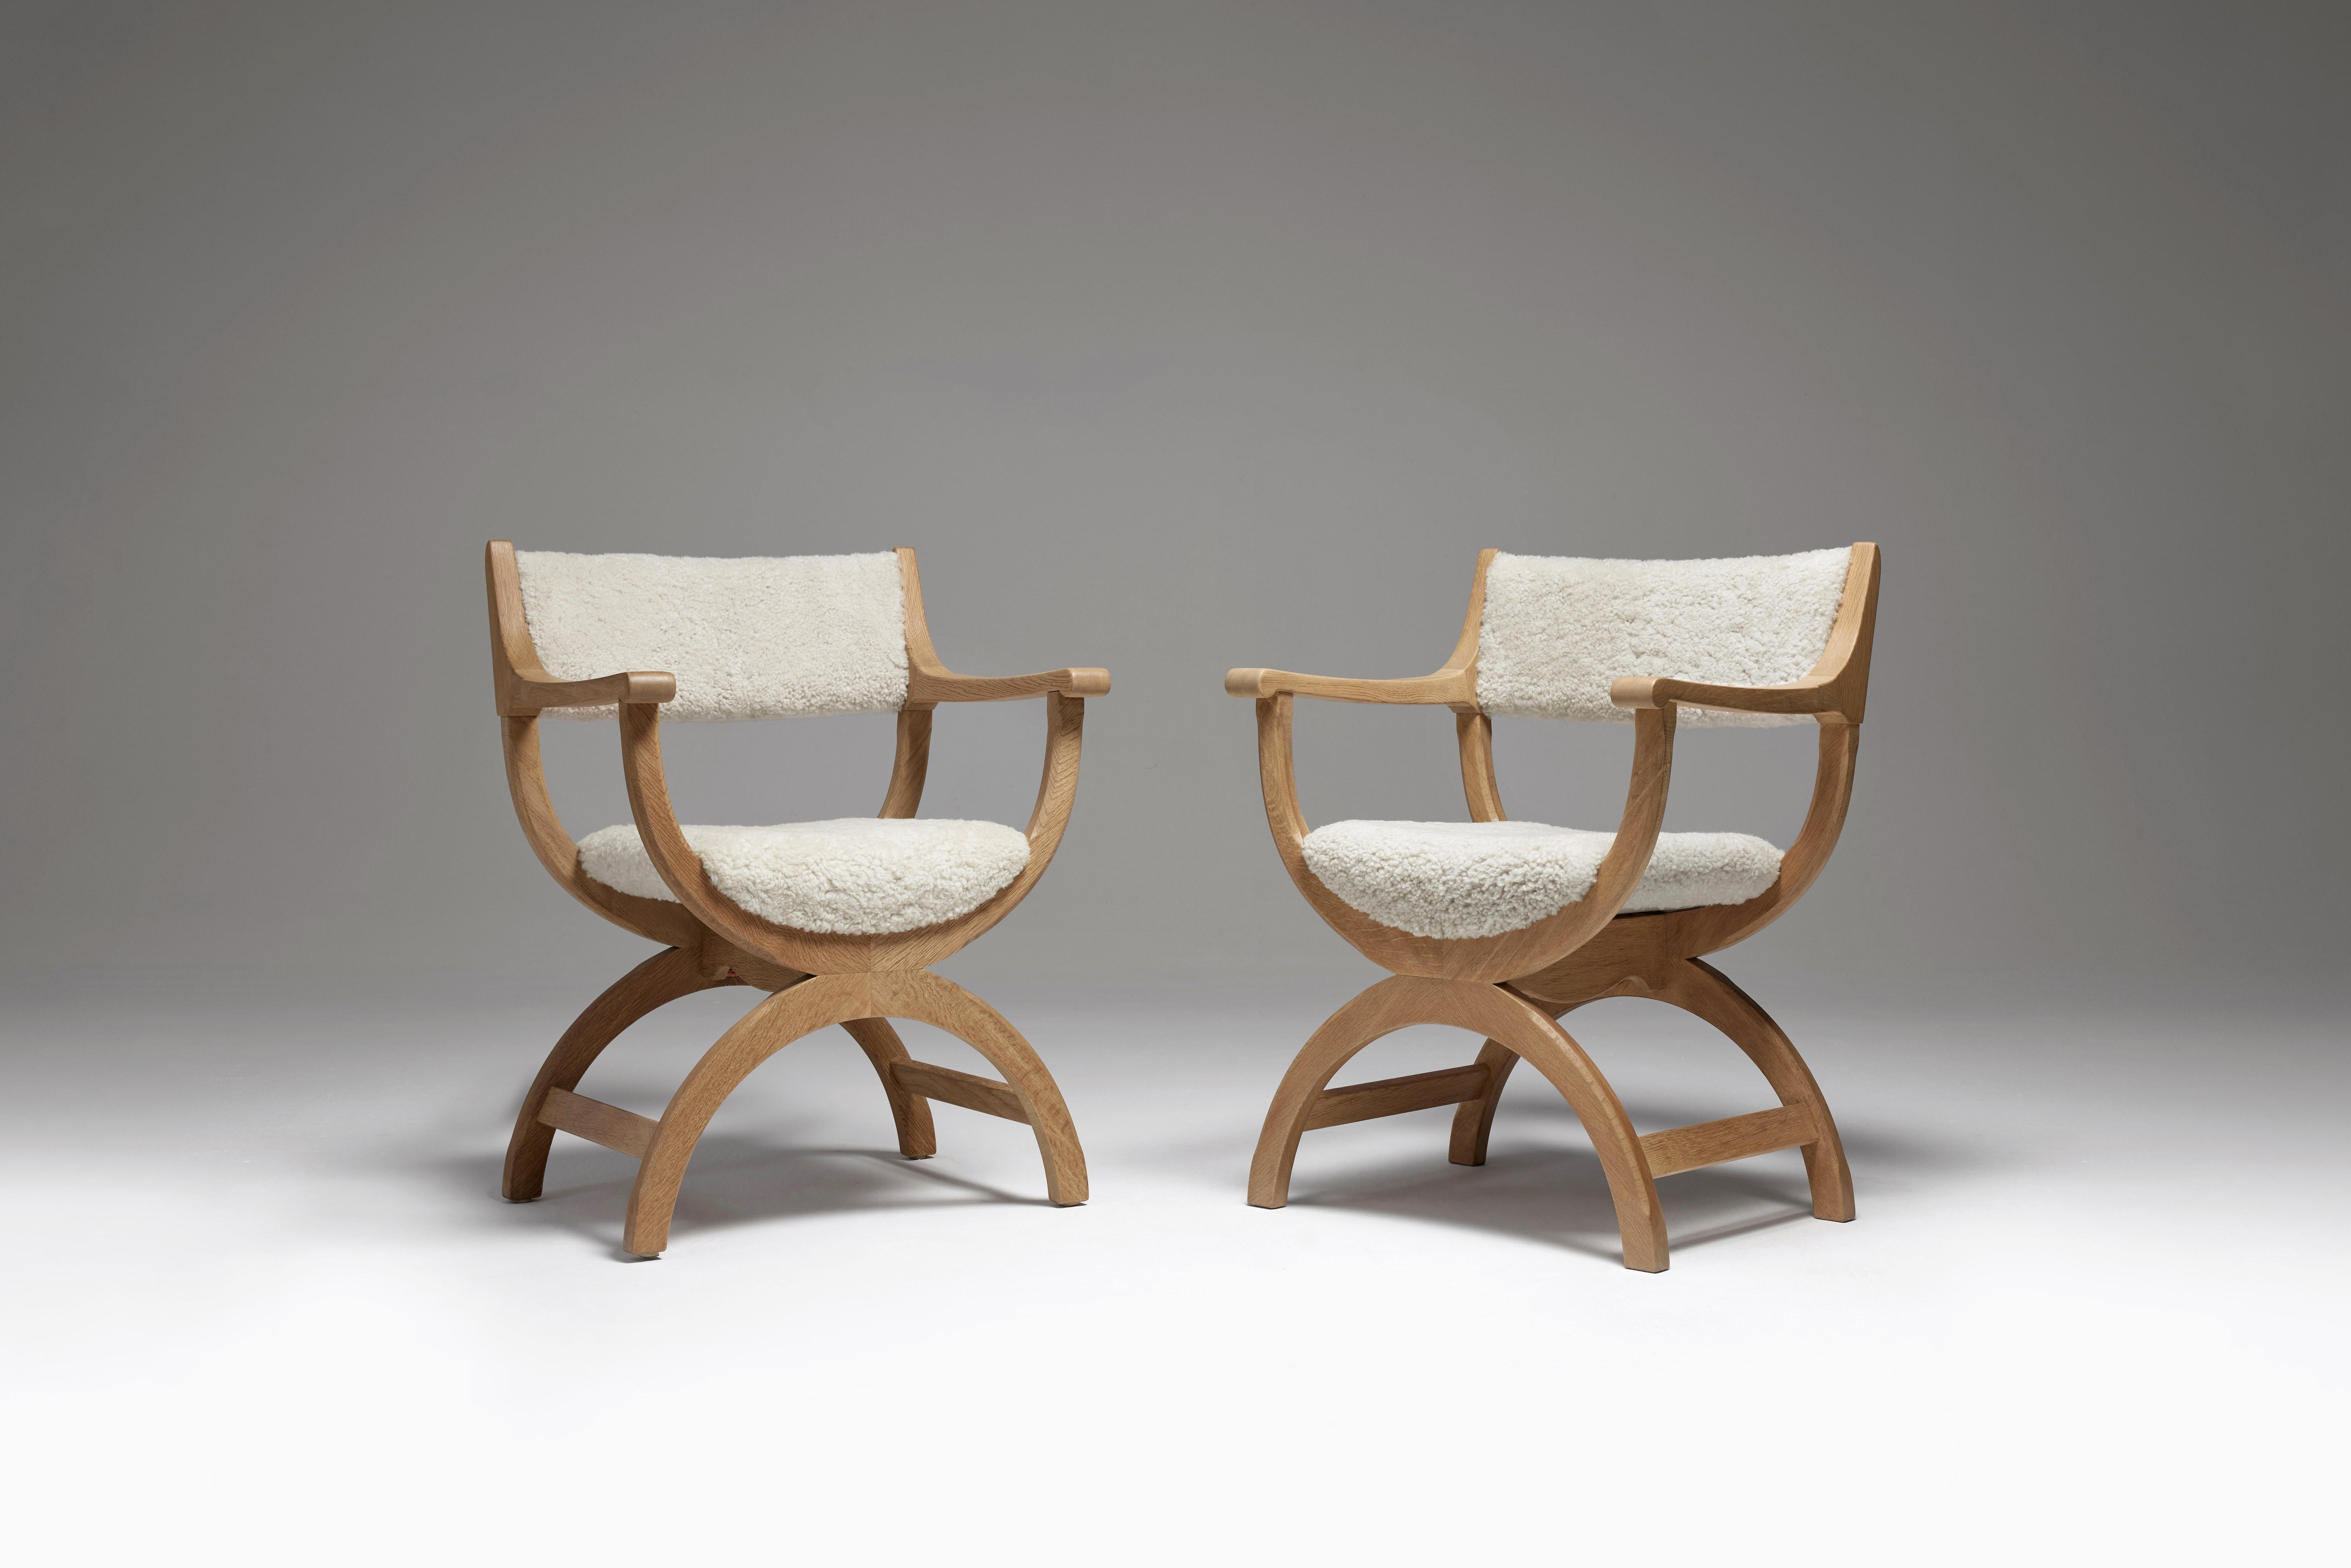 A pair of iconic chairs by Danish designer Henning Kjærnulf, often called the “kurulstol” or kurul chair. The Curule seat is a foldable and portable chair with curved legs, the roots of which go back to ancient Rome, where, apart from everyday uses,